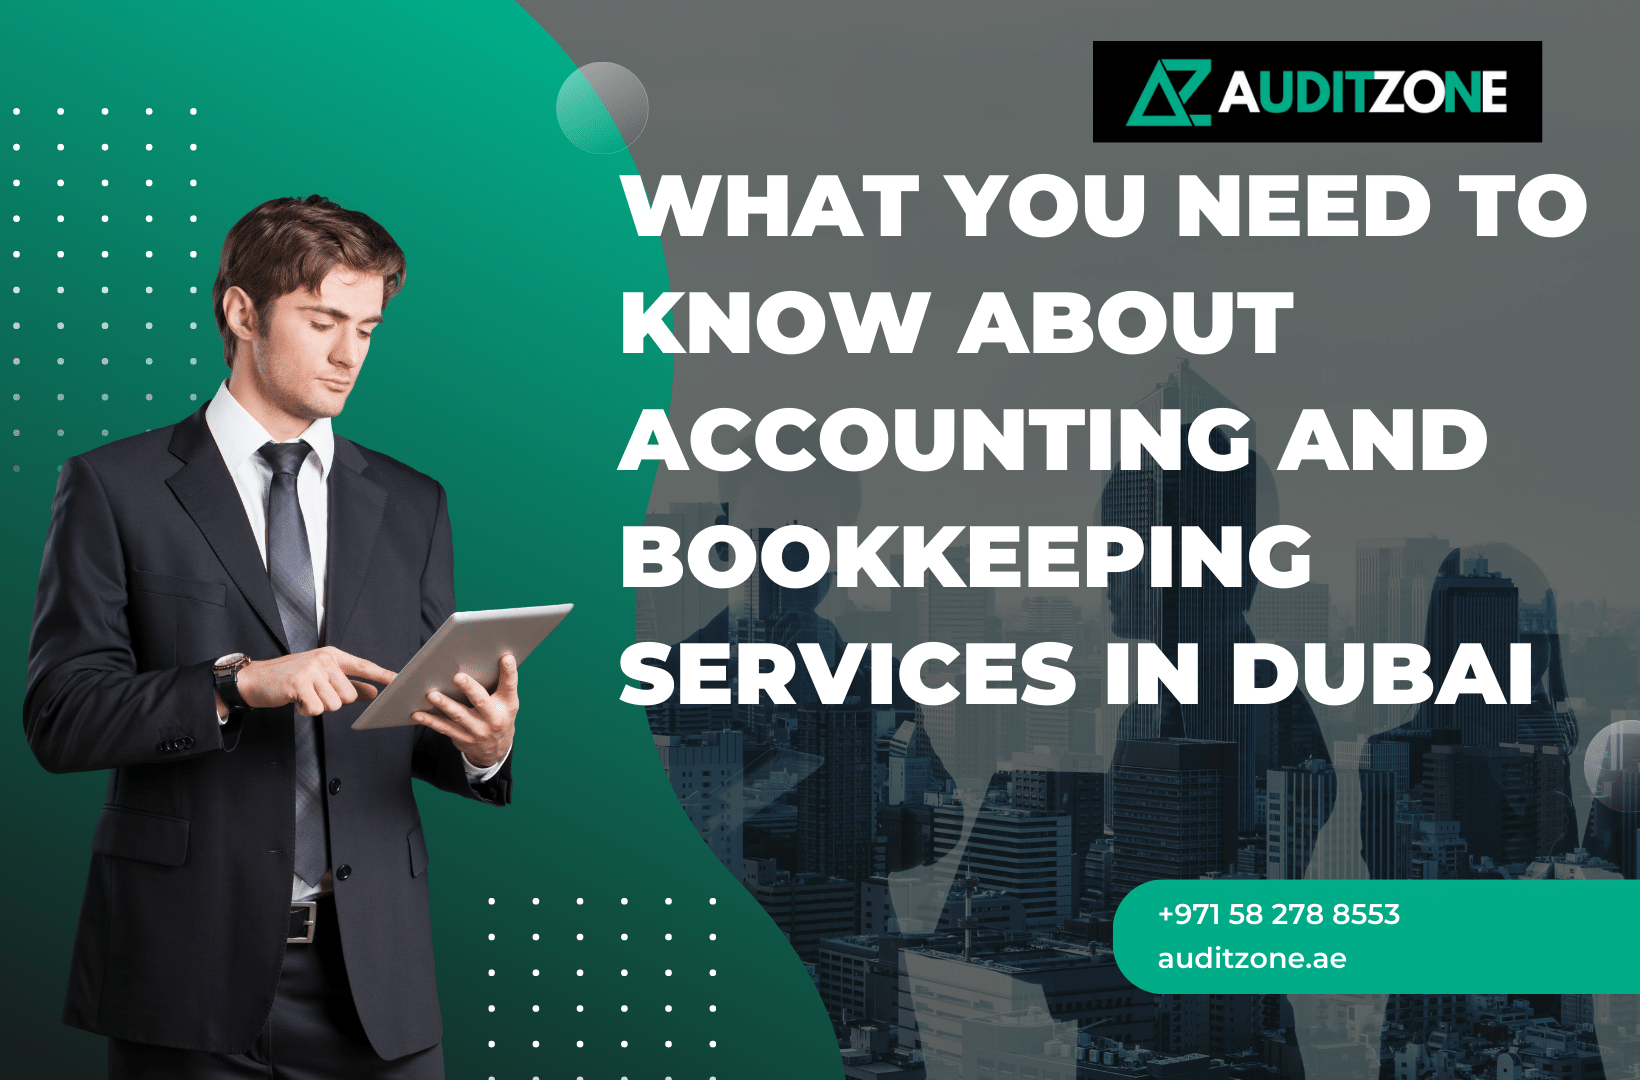 What You Need to Know About Accounting and Bookkeeping Services in Dubai